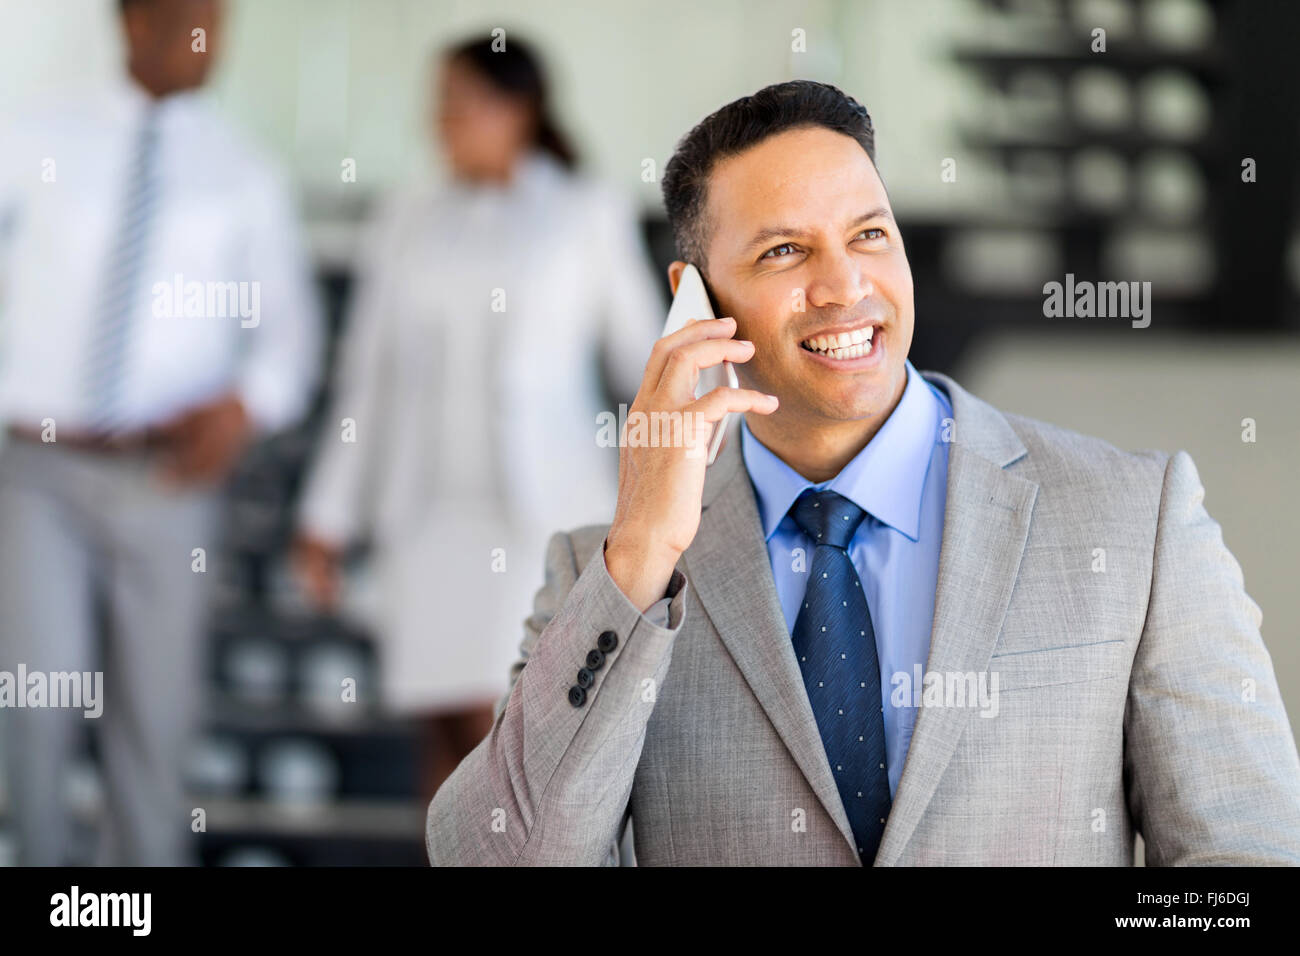 modern mid age business executive talking on cell phone Stock Photo